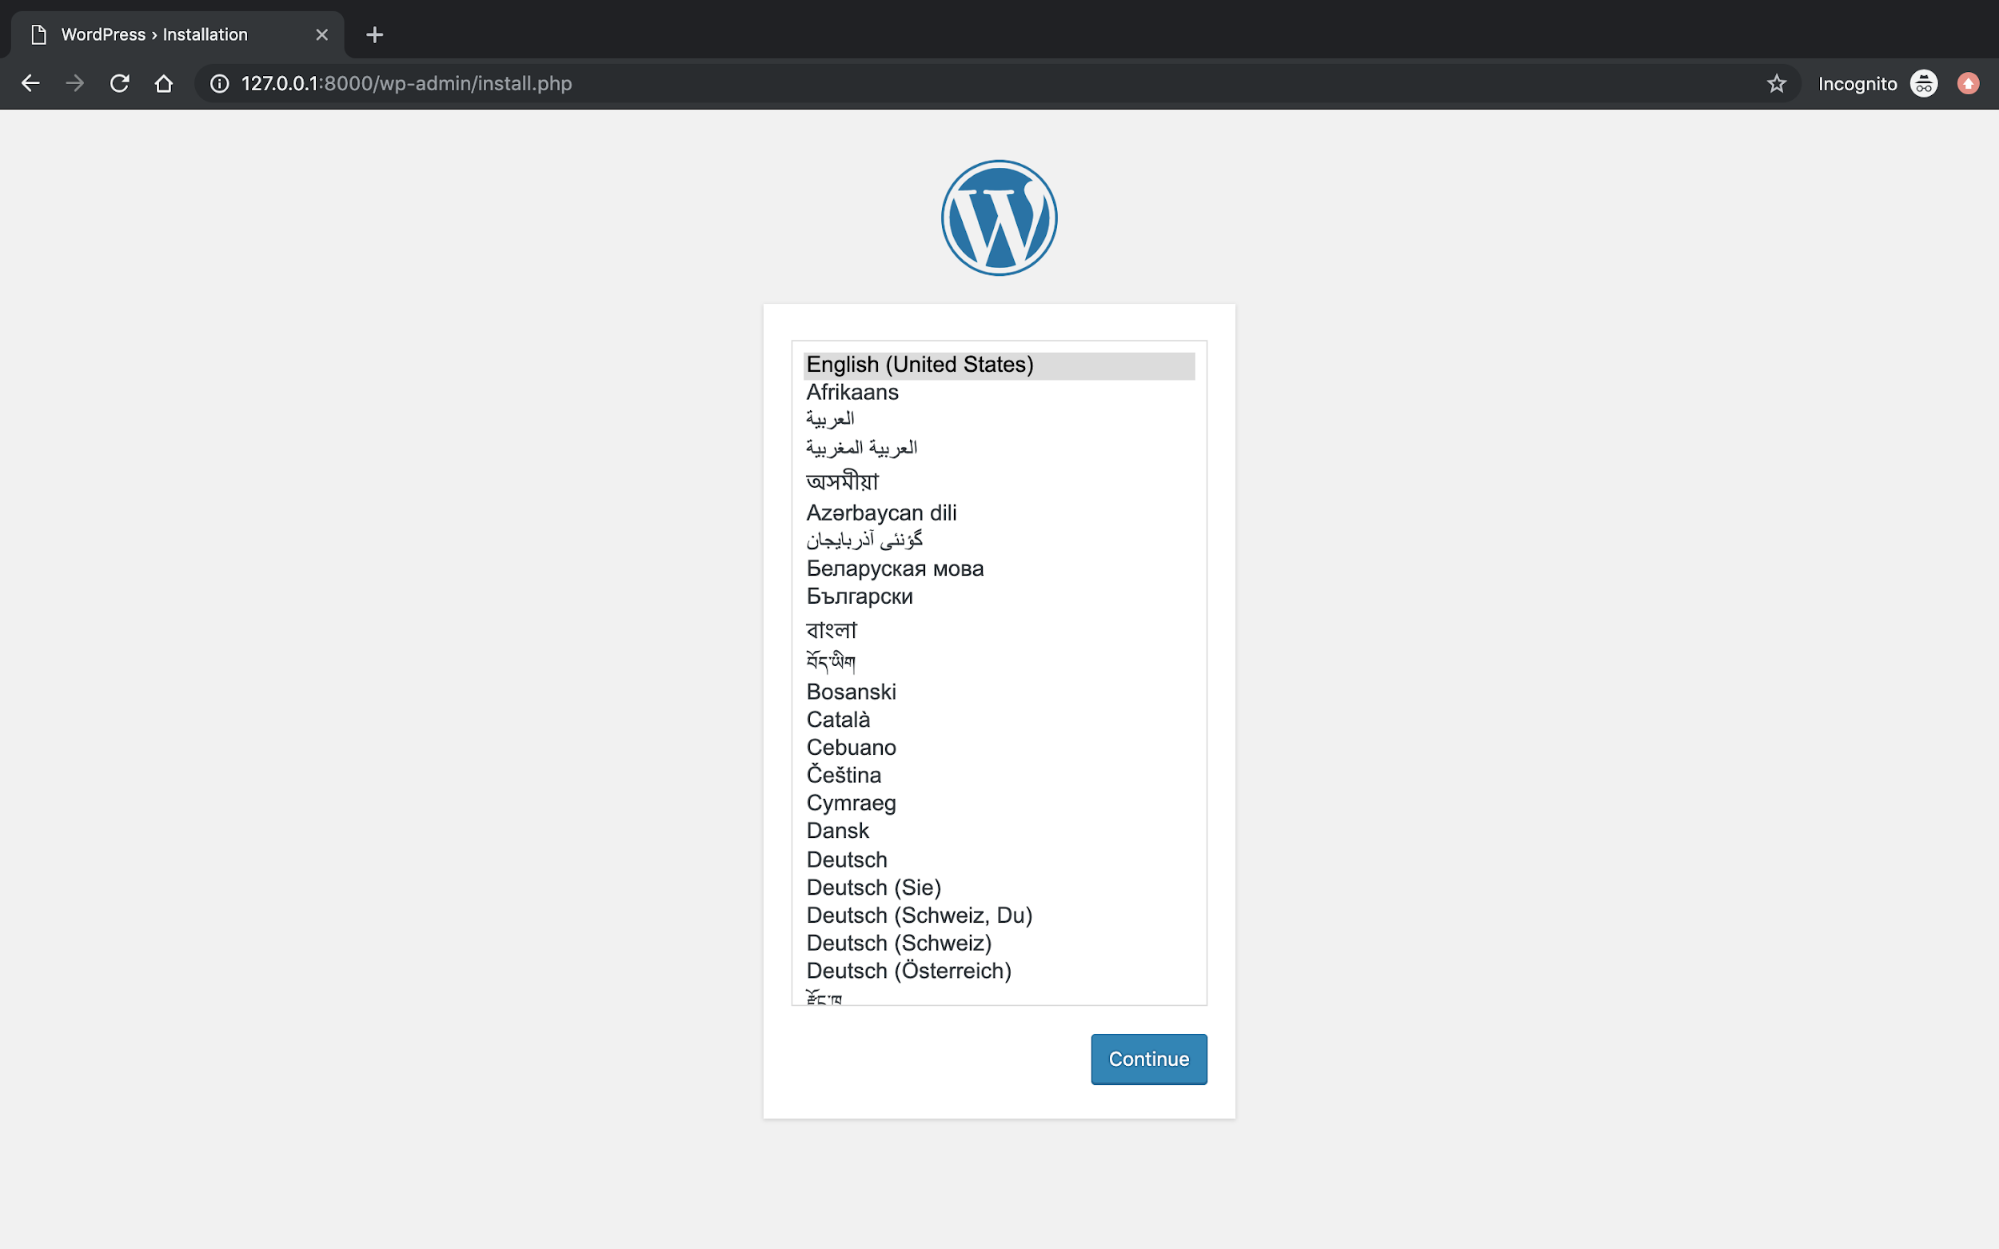 And your WordPress website is up and running!